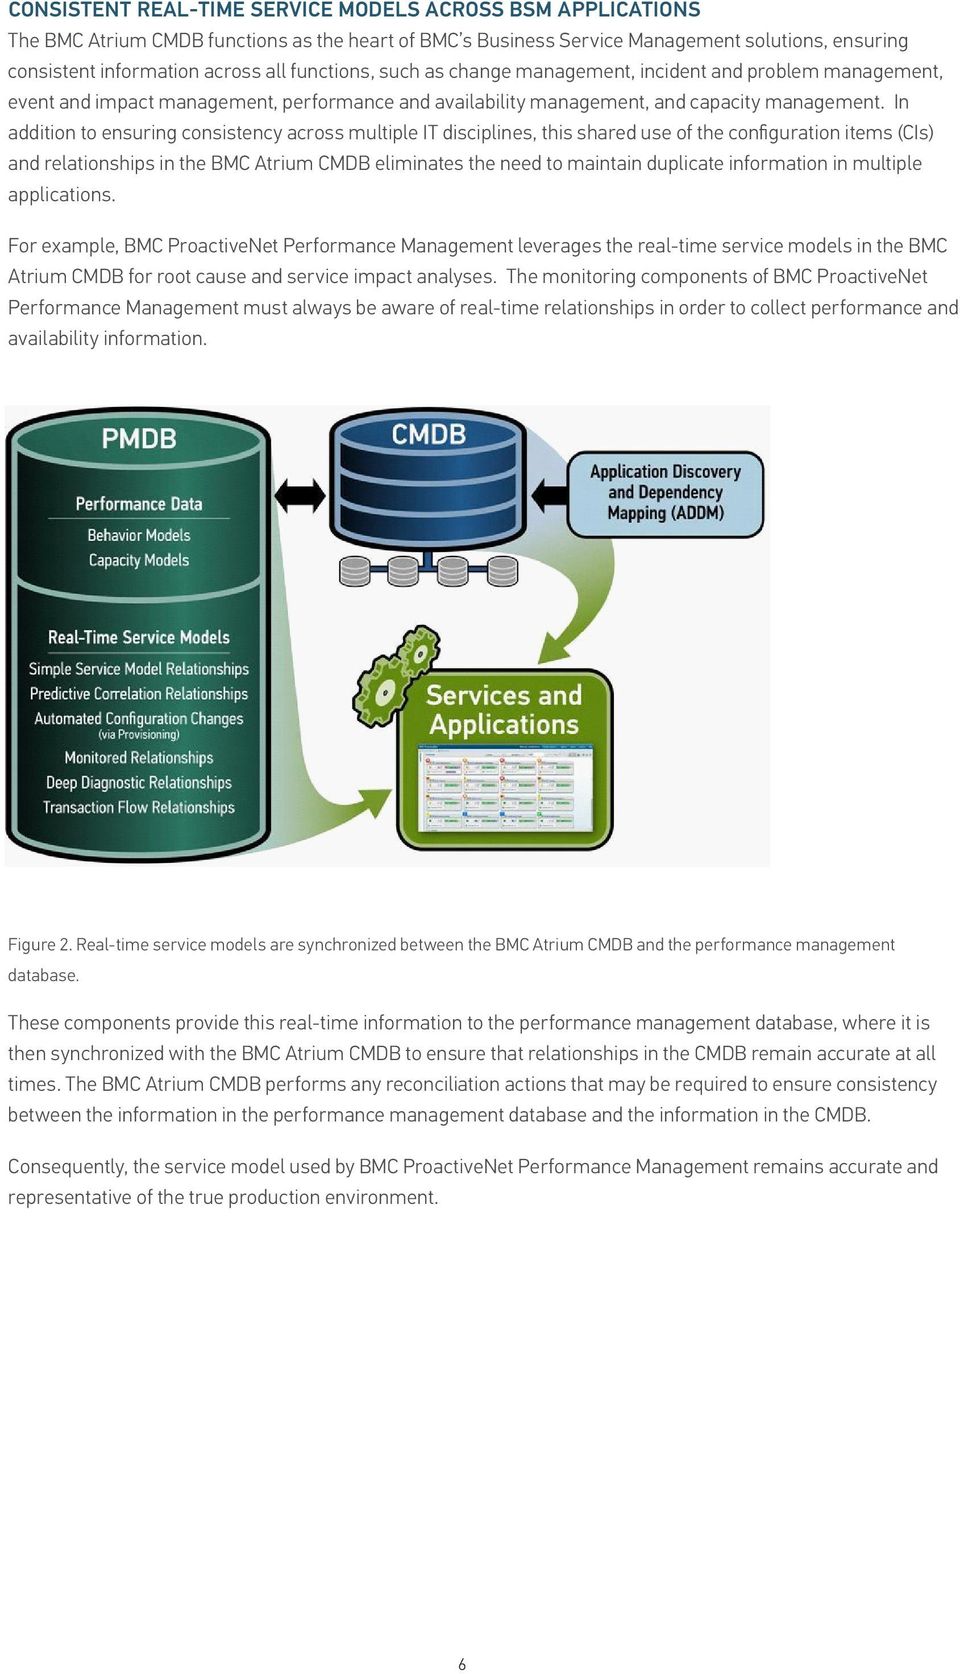 In addition to ensuring consistency across multiple IT disciplines, this shared use of the configuration items (CIs) and relationships in the BMC Atrium CMDB eliminates the need to maintain duplicate